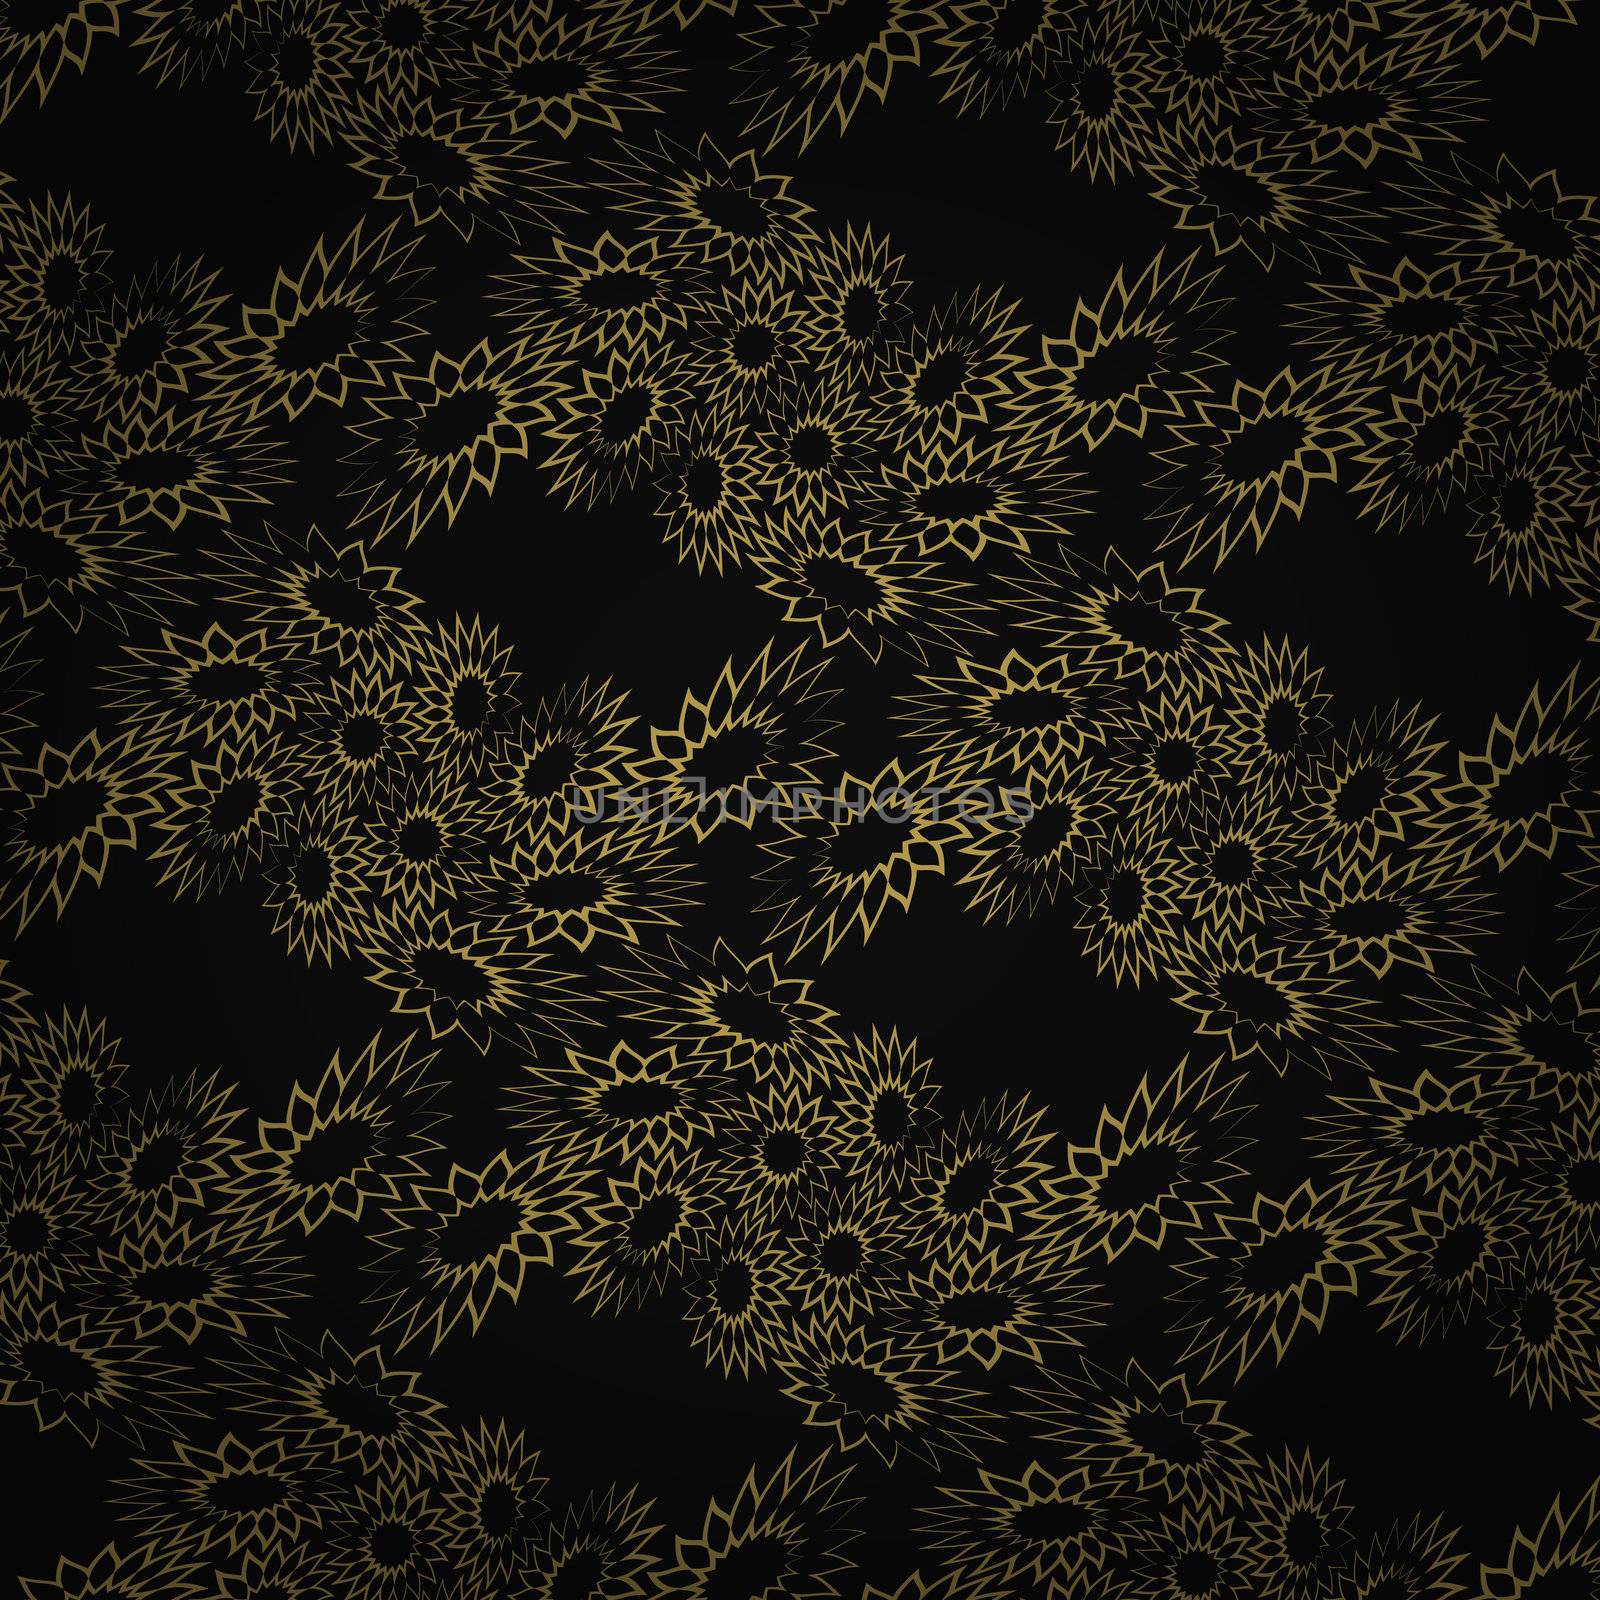 new royalty free abstract background can use like old style wallpaper